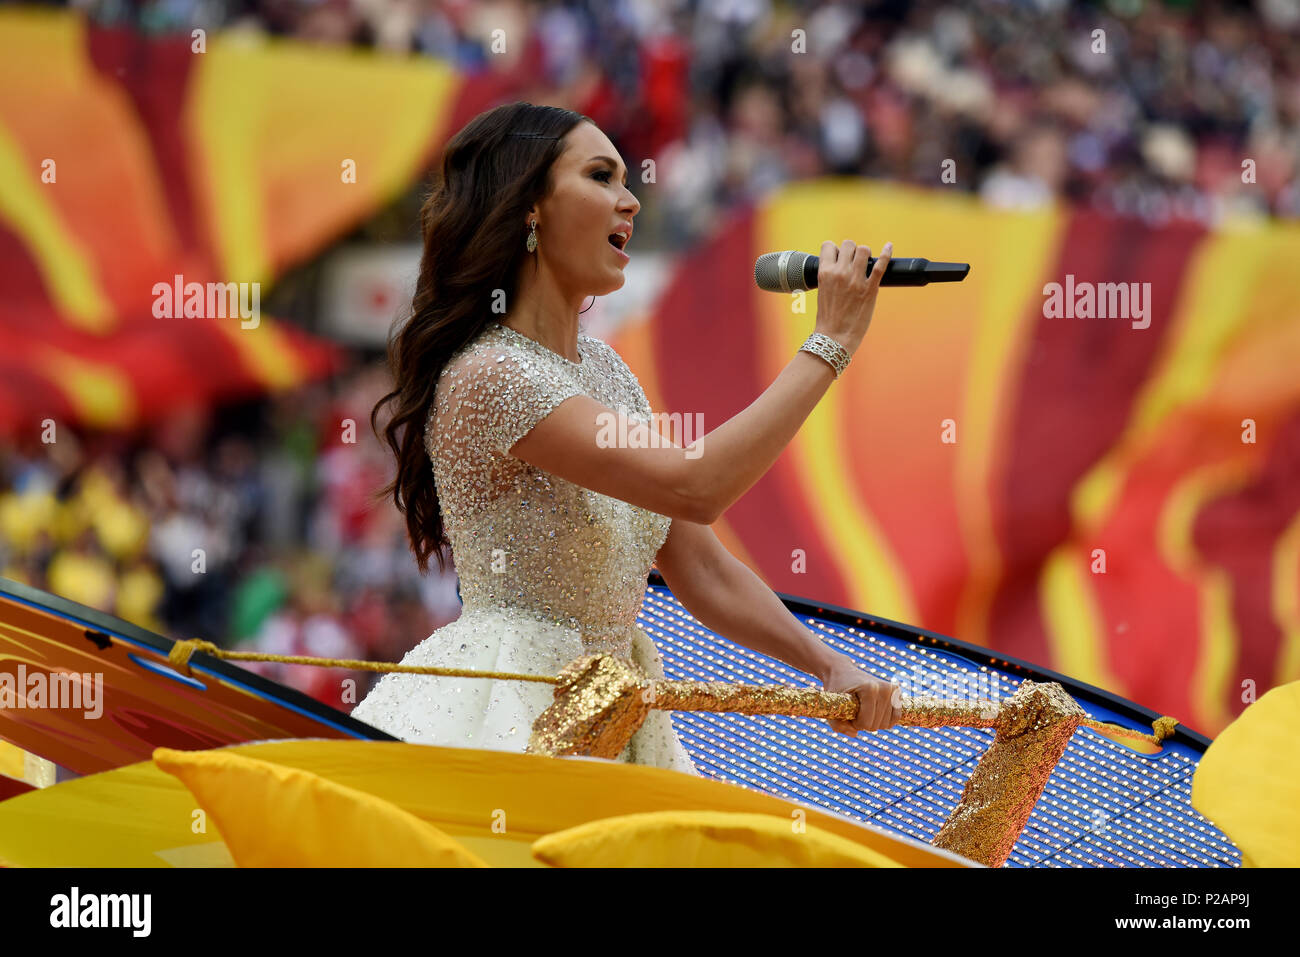 Moscow, Russia - June 14, 2018. Russian opera singer Aida Garifullina performing at the opening ceremony of FIFA World Cup 2018 in Russia. Credit: Alizada Studios/Alamy Live News Stock Photo